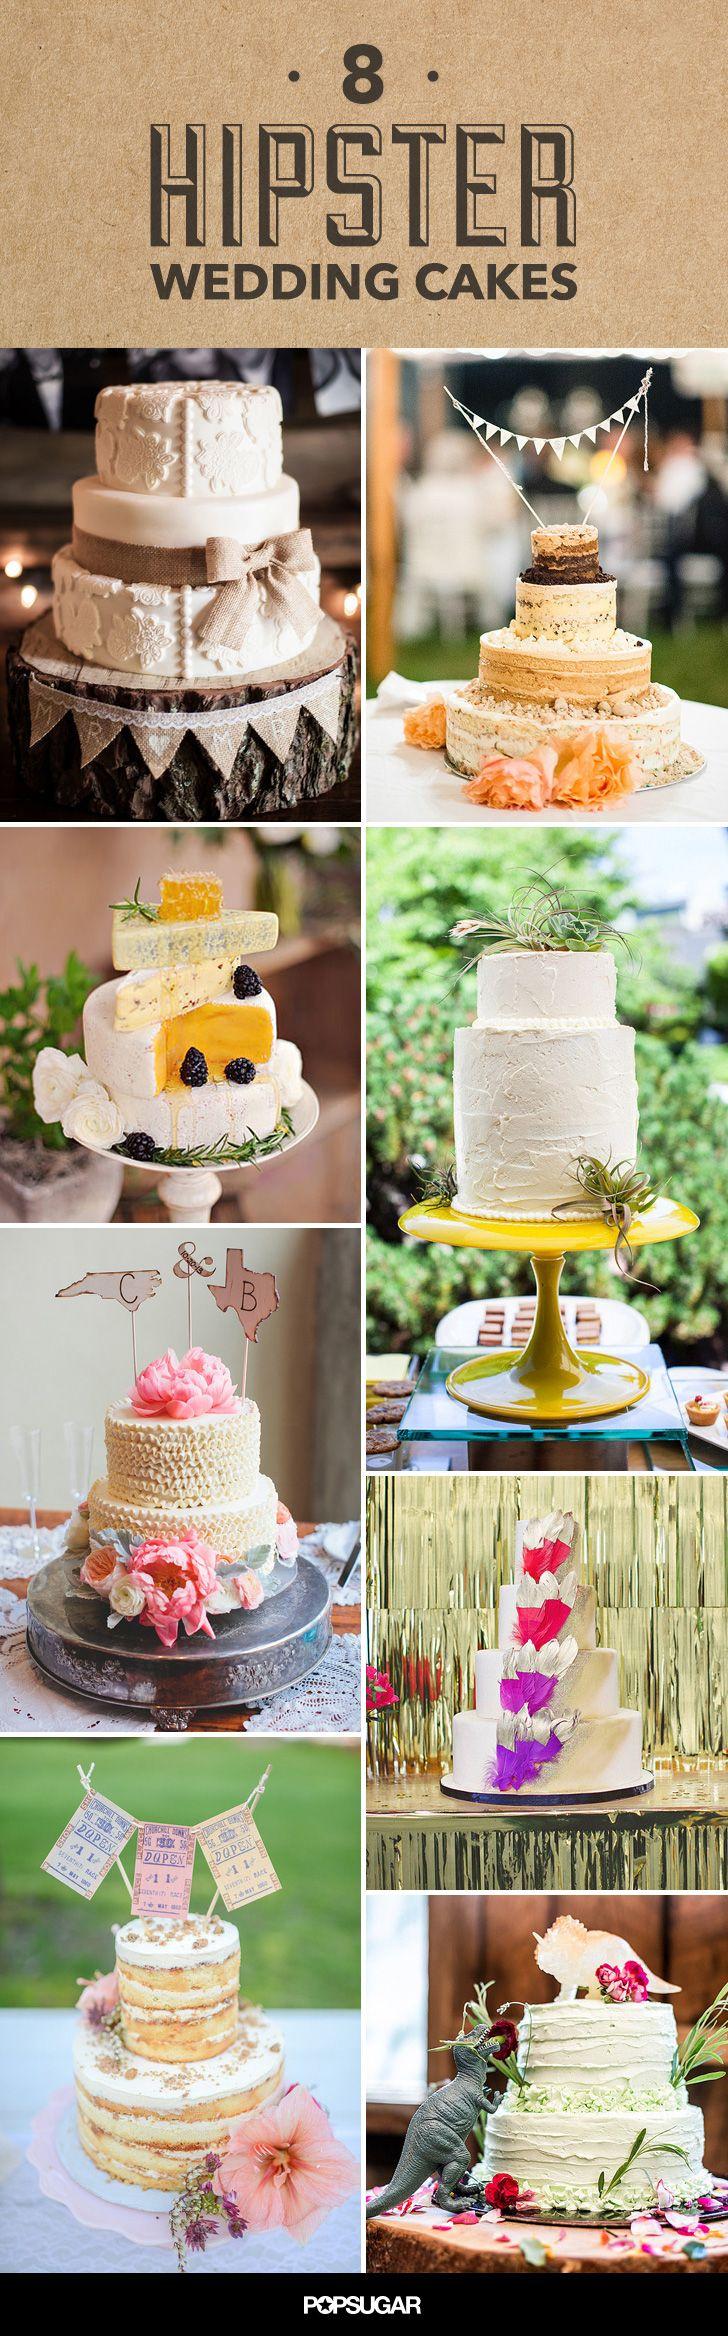 Hochzeit - These Hipster Wedding Cakes Are So Sweet